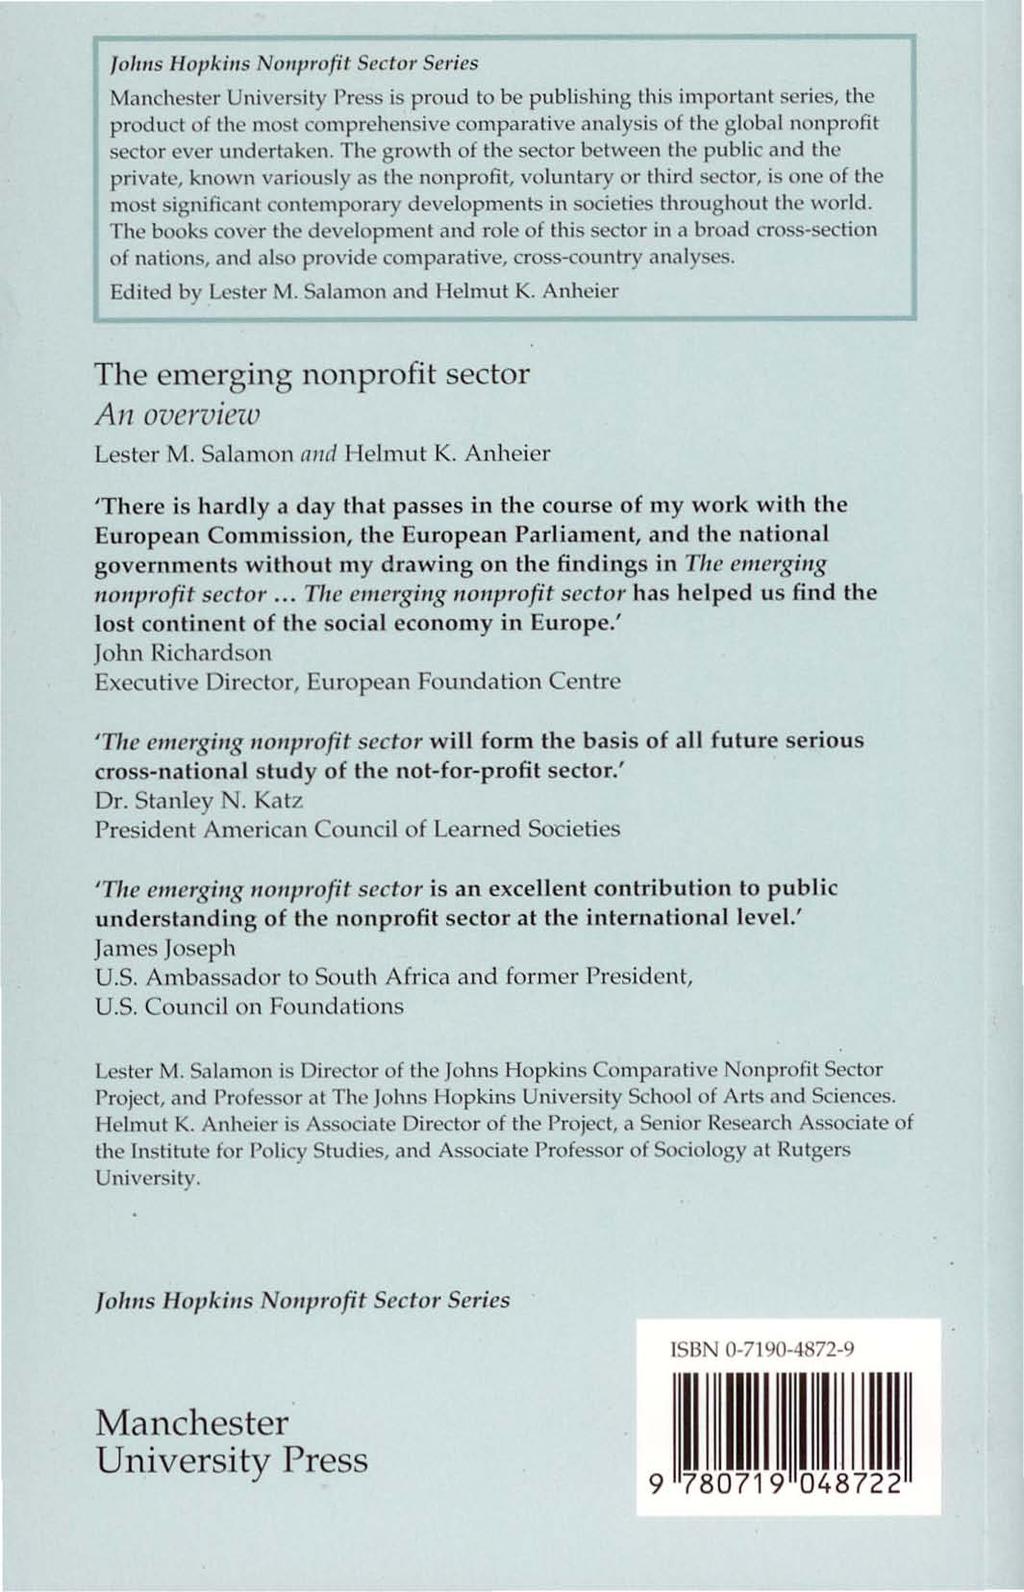 /o/llls Hopkills NOllprofit Sector Series Manchester Uni versit y Press is proud to be publishing this important series, the product of the most comprehensive compara tive analysis of the global